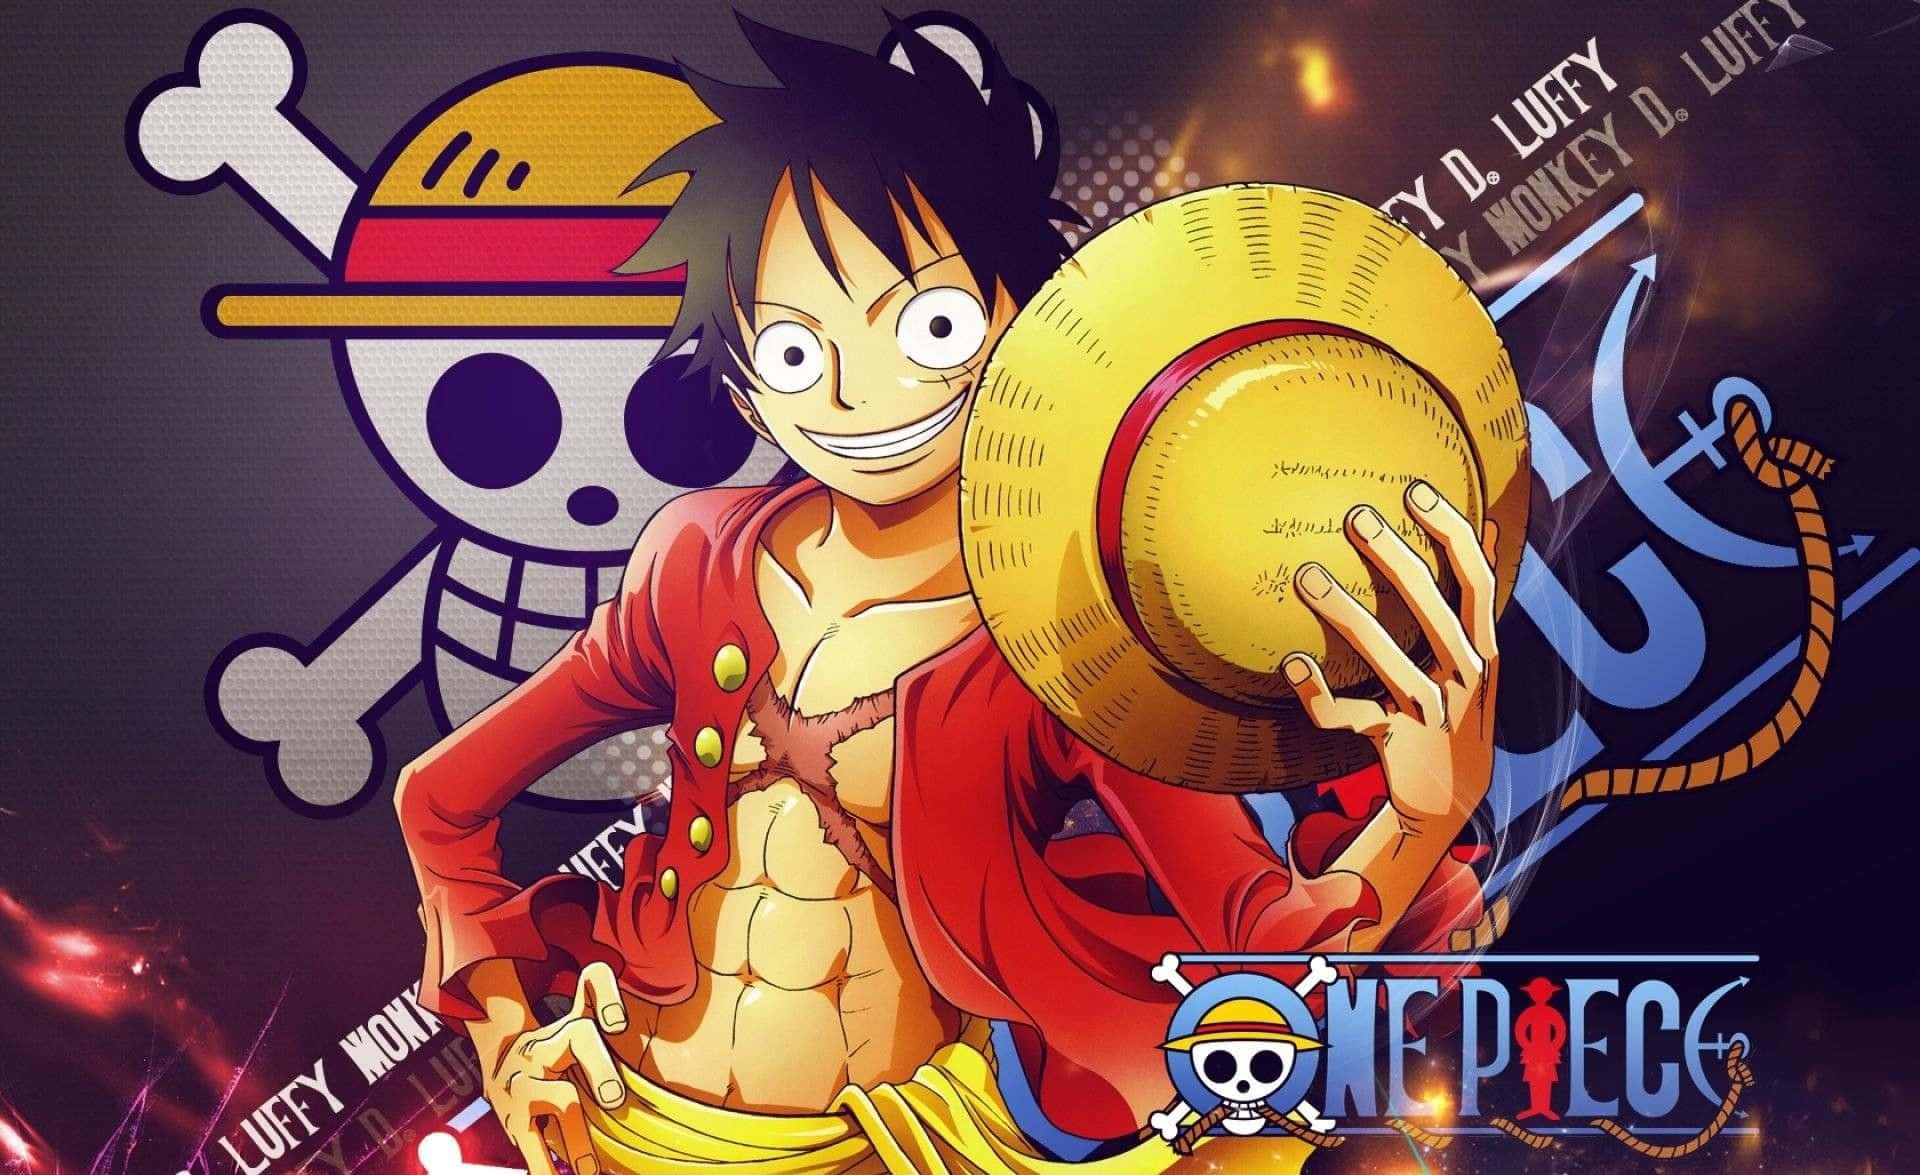 Free Cool Luffy Wallpaper Downloads, [100+] Cool Luffy Wallpapers for FREE  